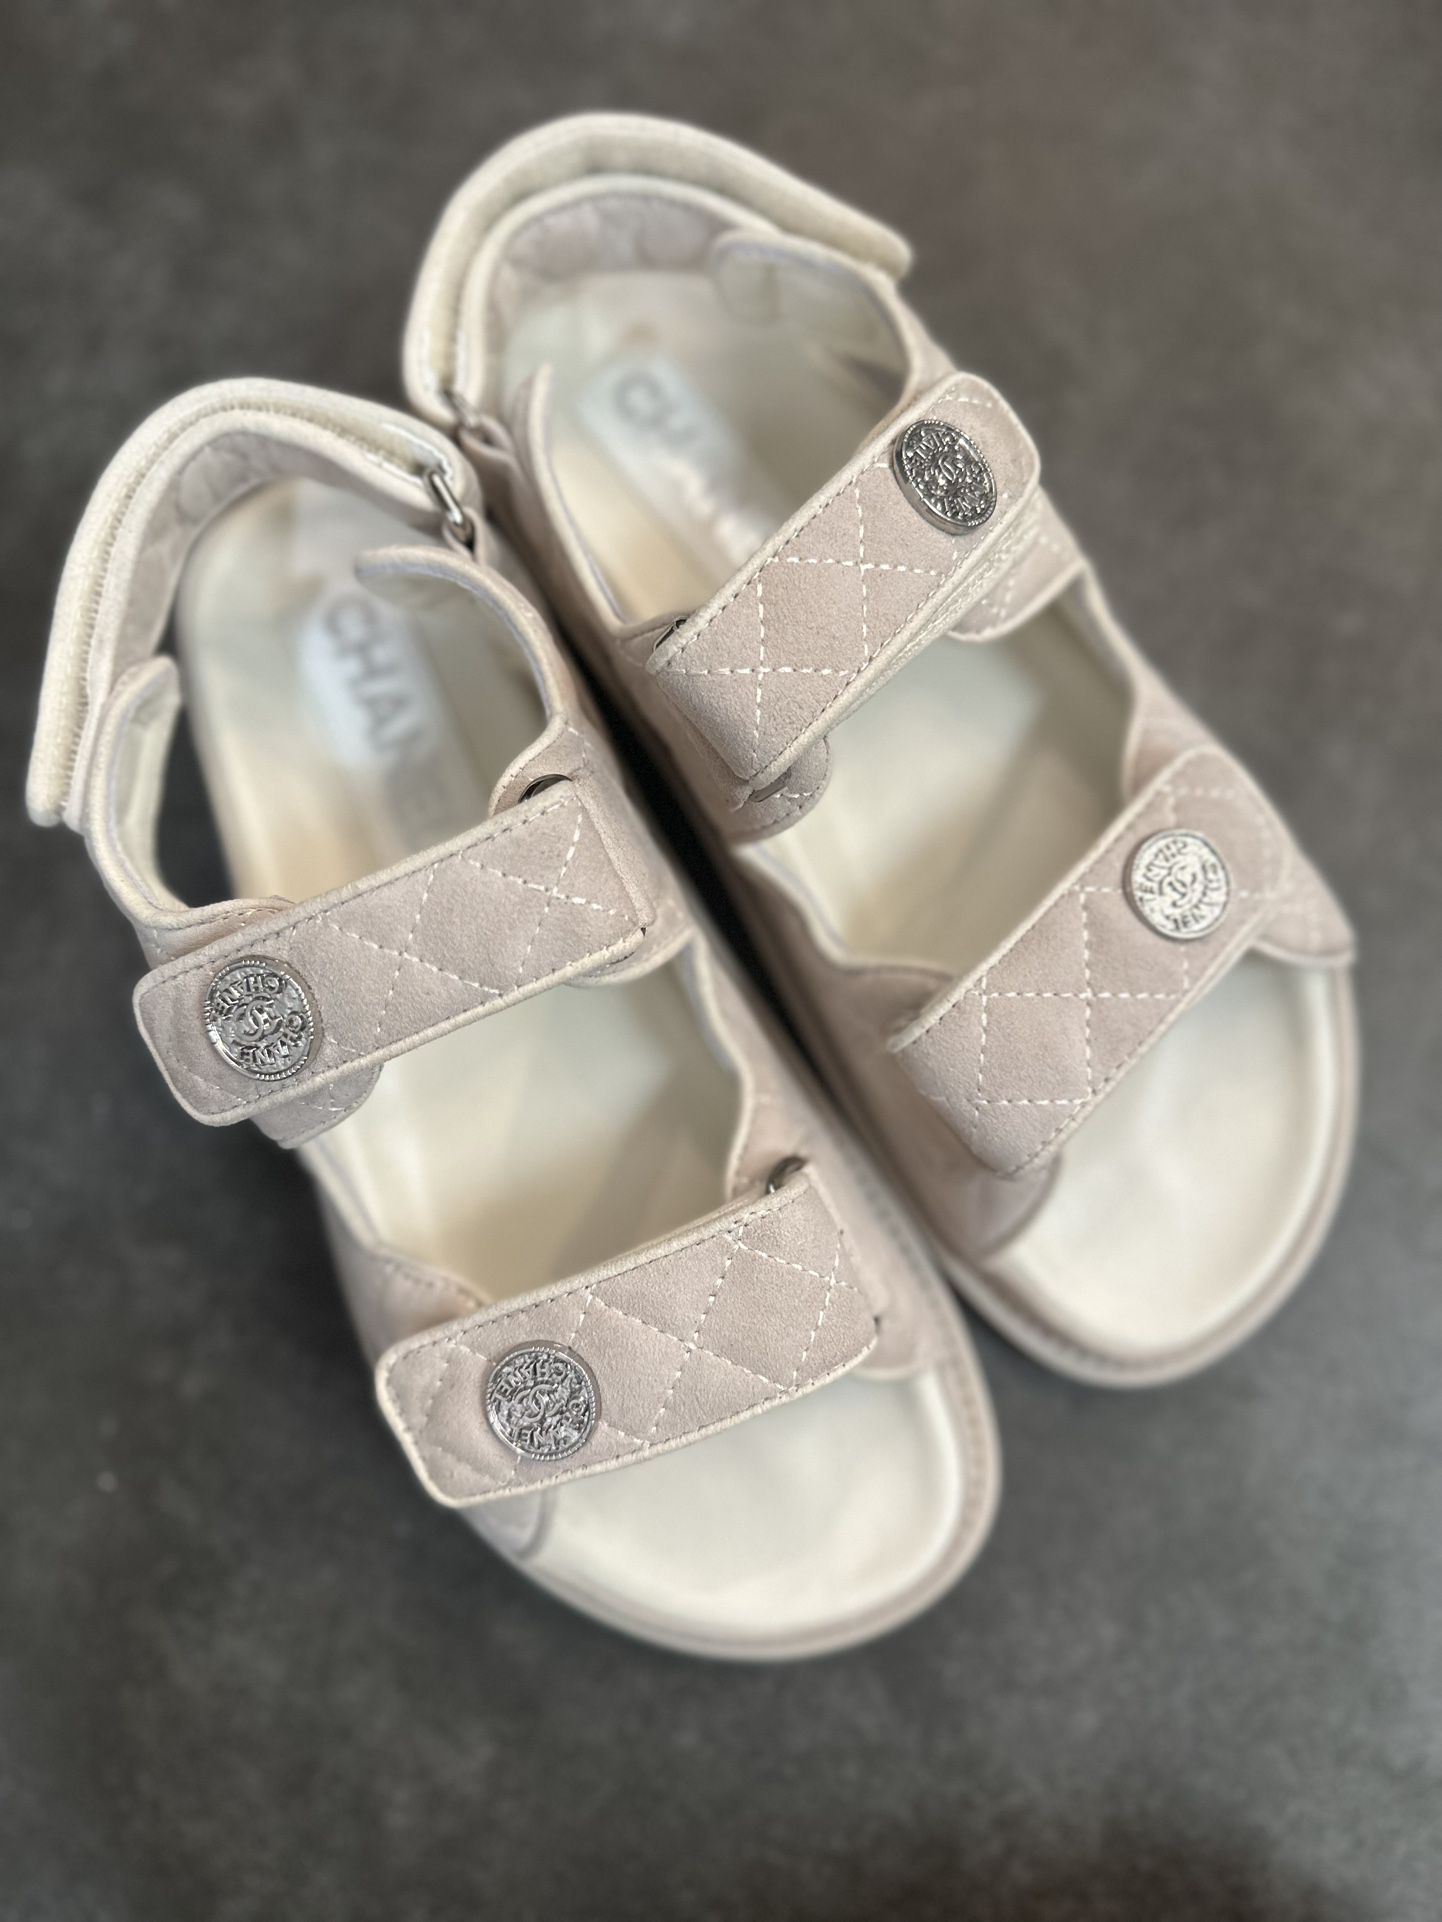 Chanel Pink Daddy Sandals Eu Size 38 US Size 7.5 for Sale in Miami, FL -  OfferUp